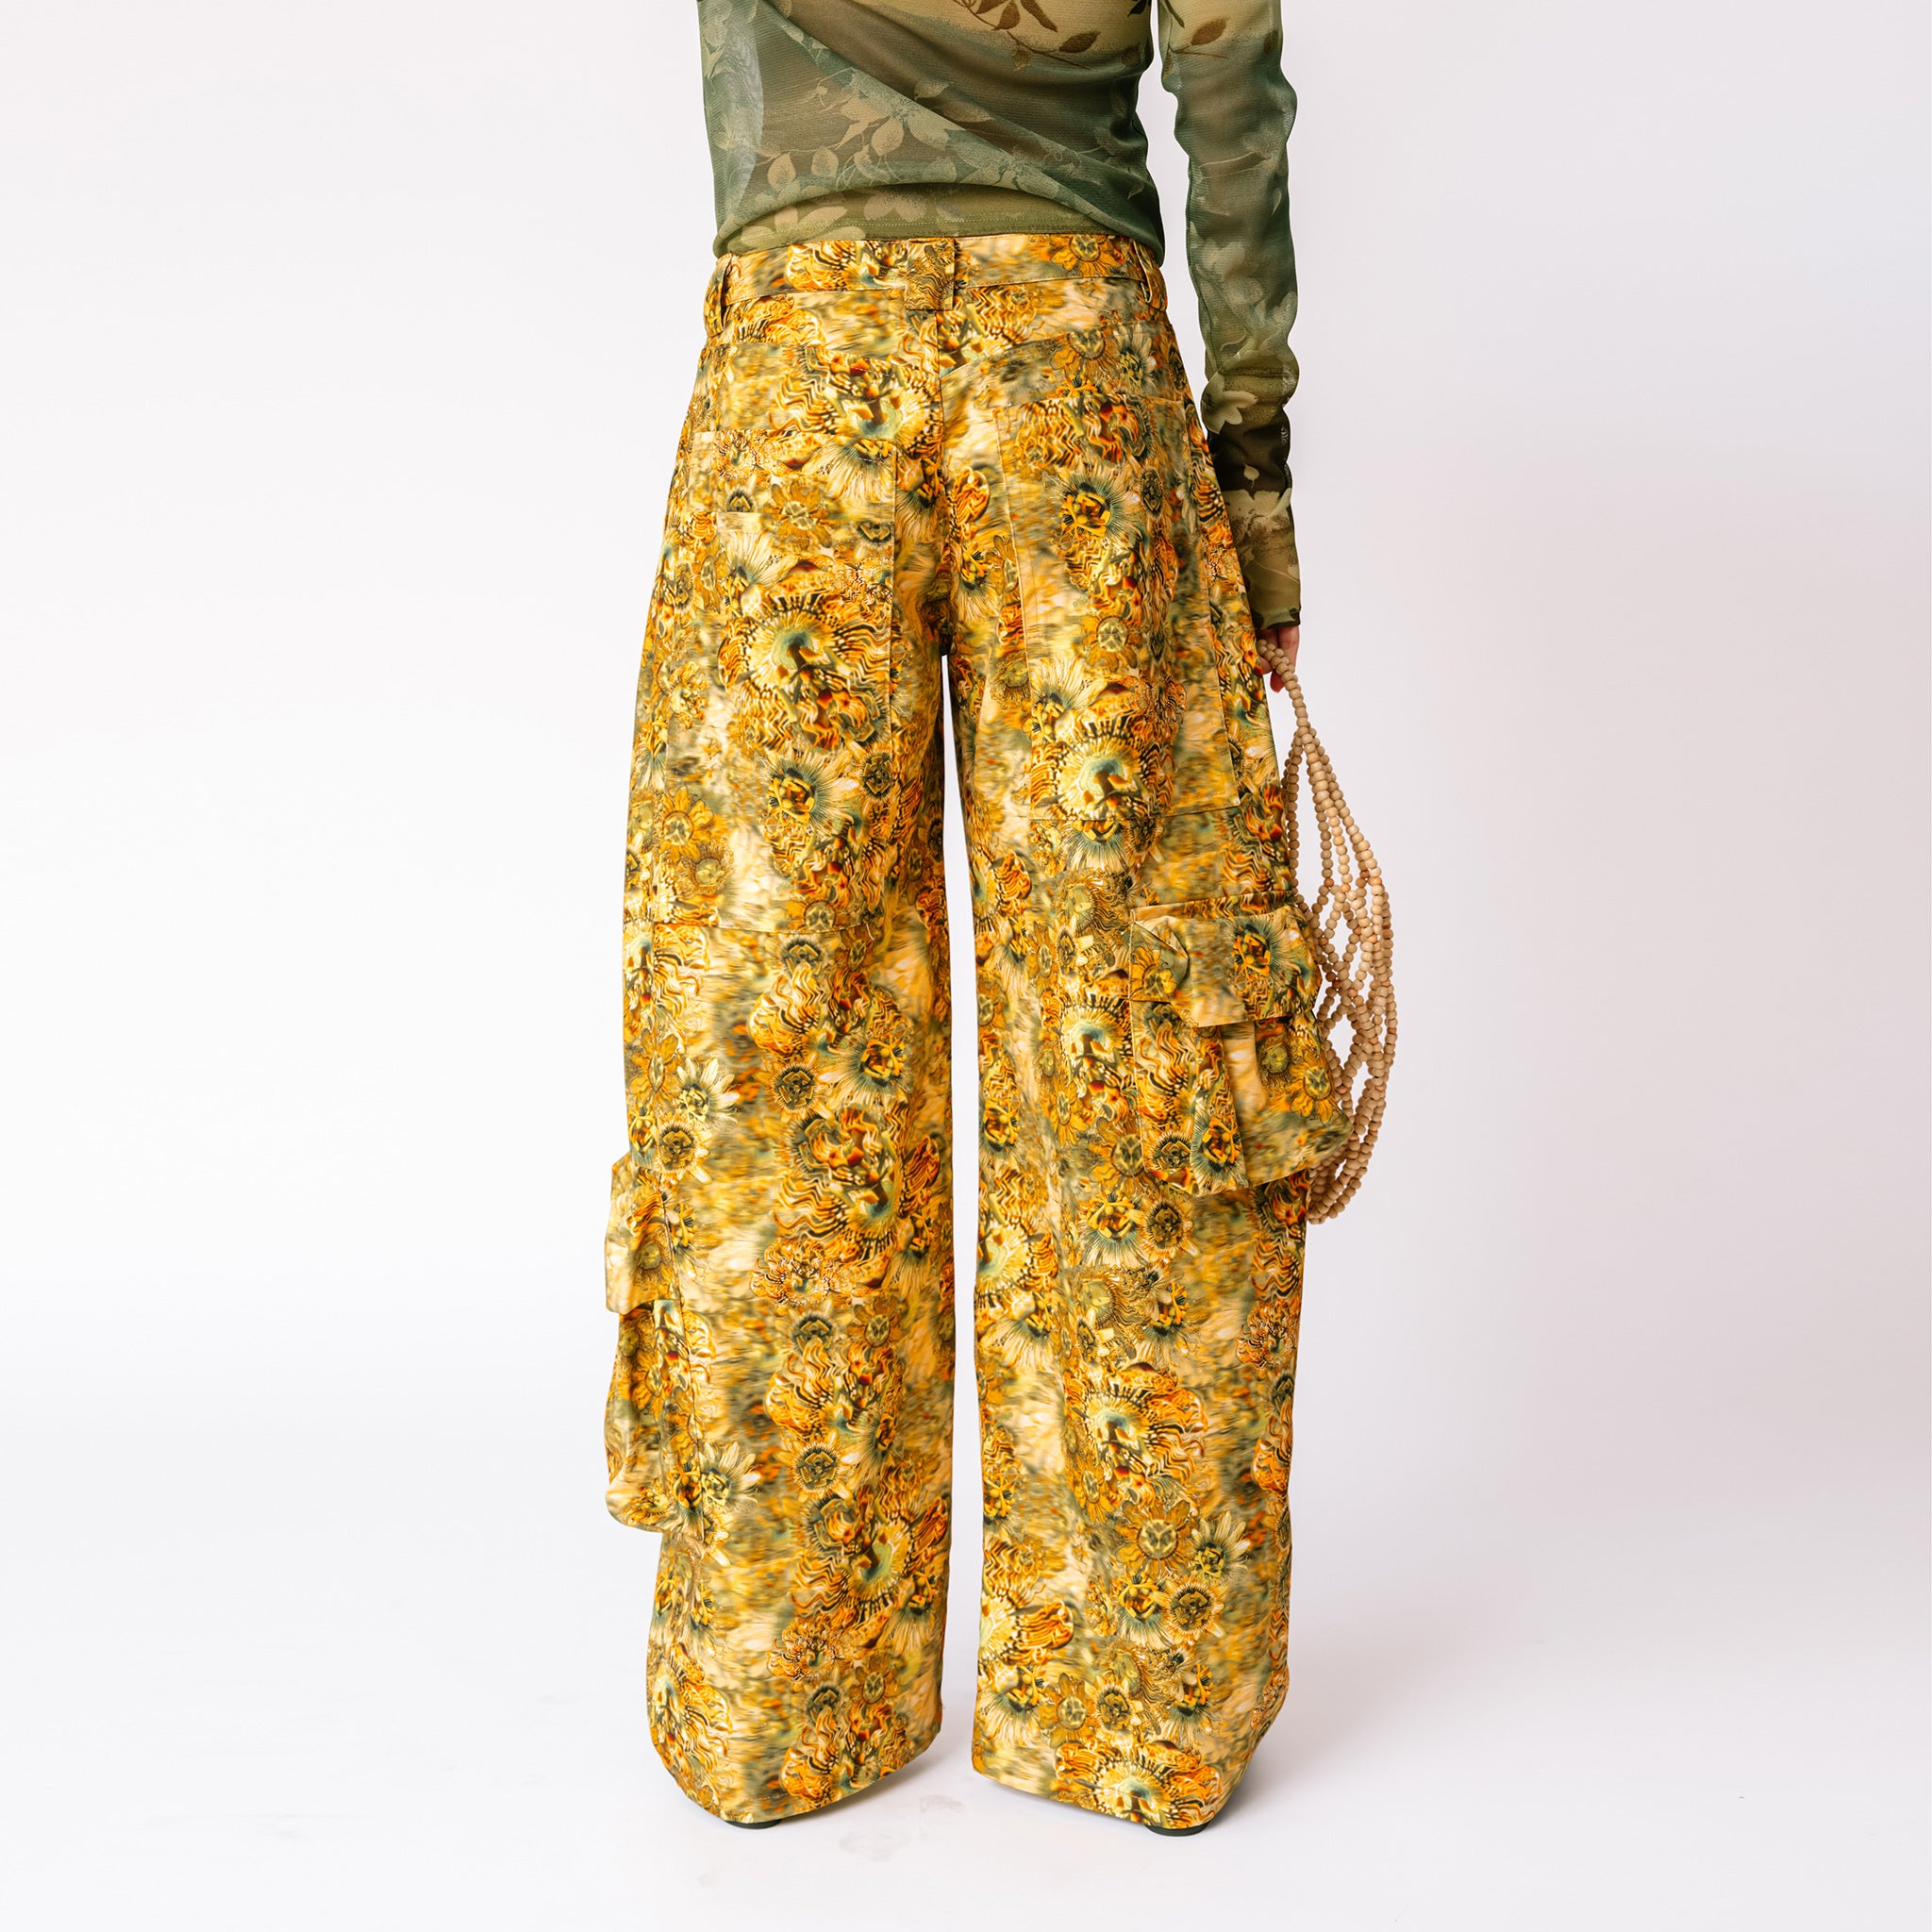 A model wears the brown and yellow floral printed Lawn Cargo Pants by Collina Strada with a mesh green long sleeved top - back view.